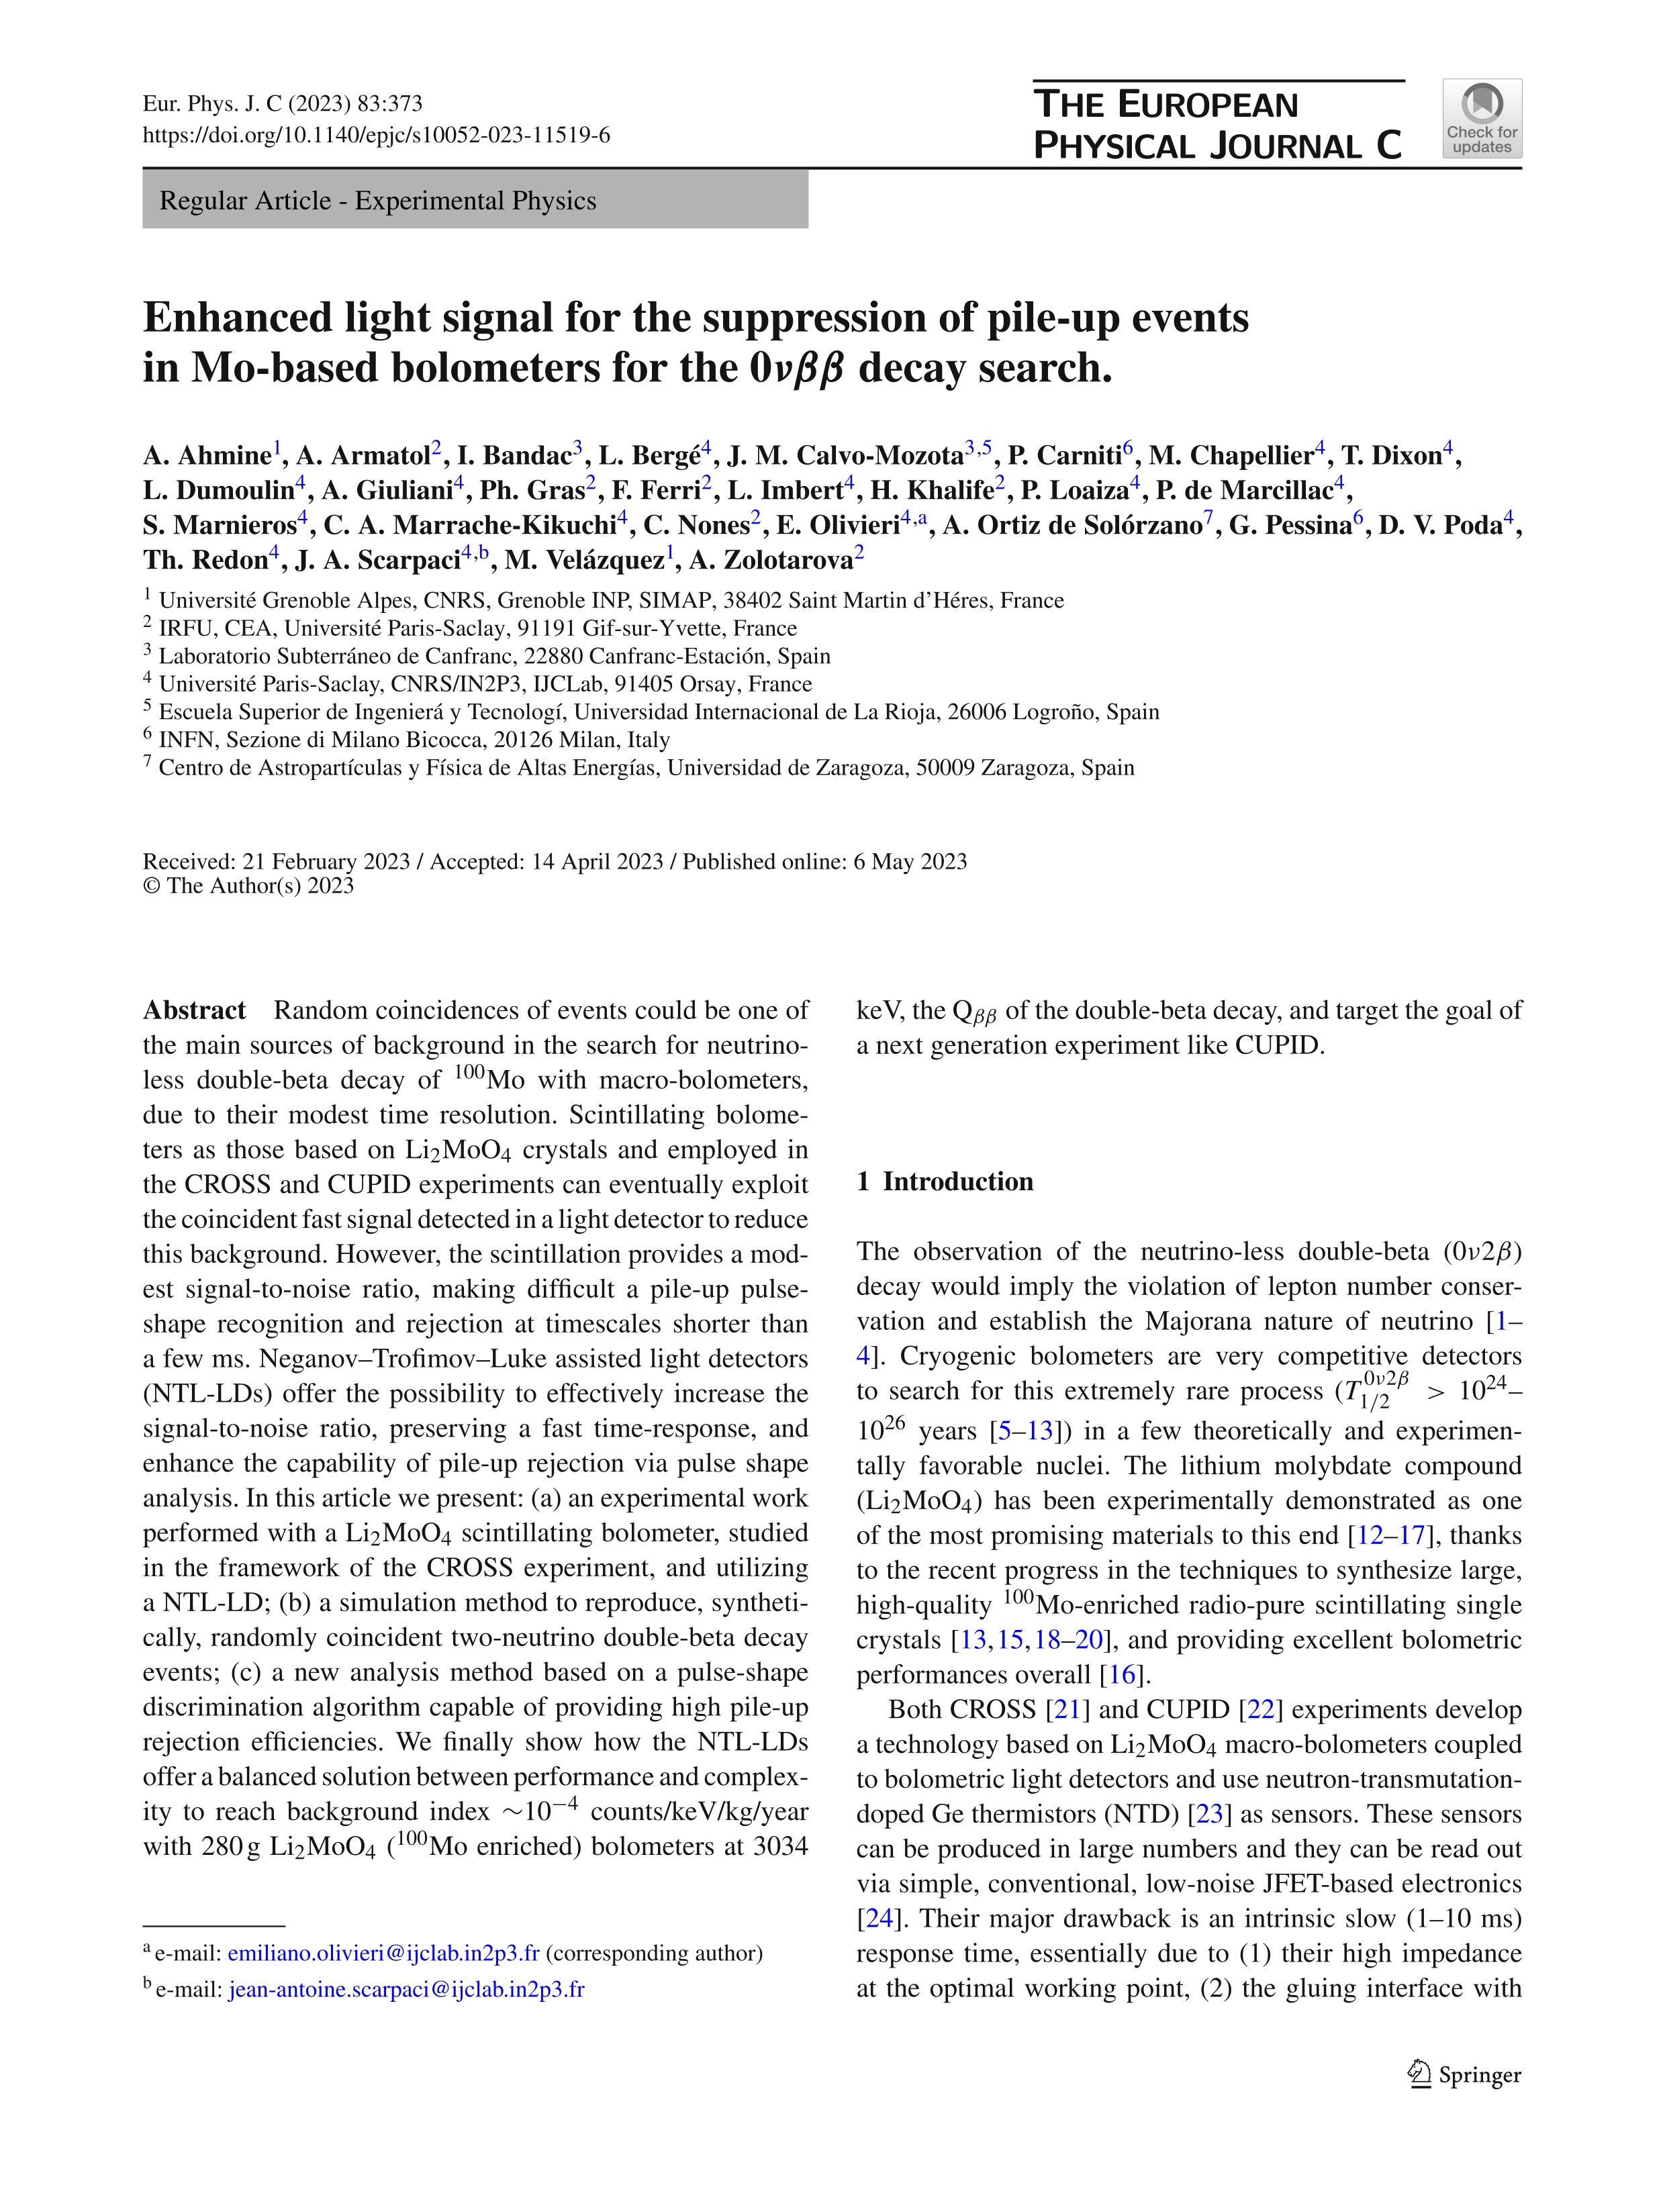 Enhanced light signal for the suppression of pile-up events in Mo-based bolometers for the 0¿ßß decay search